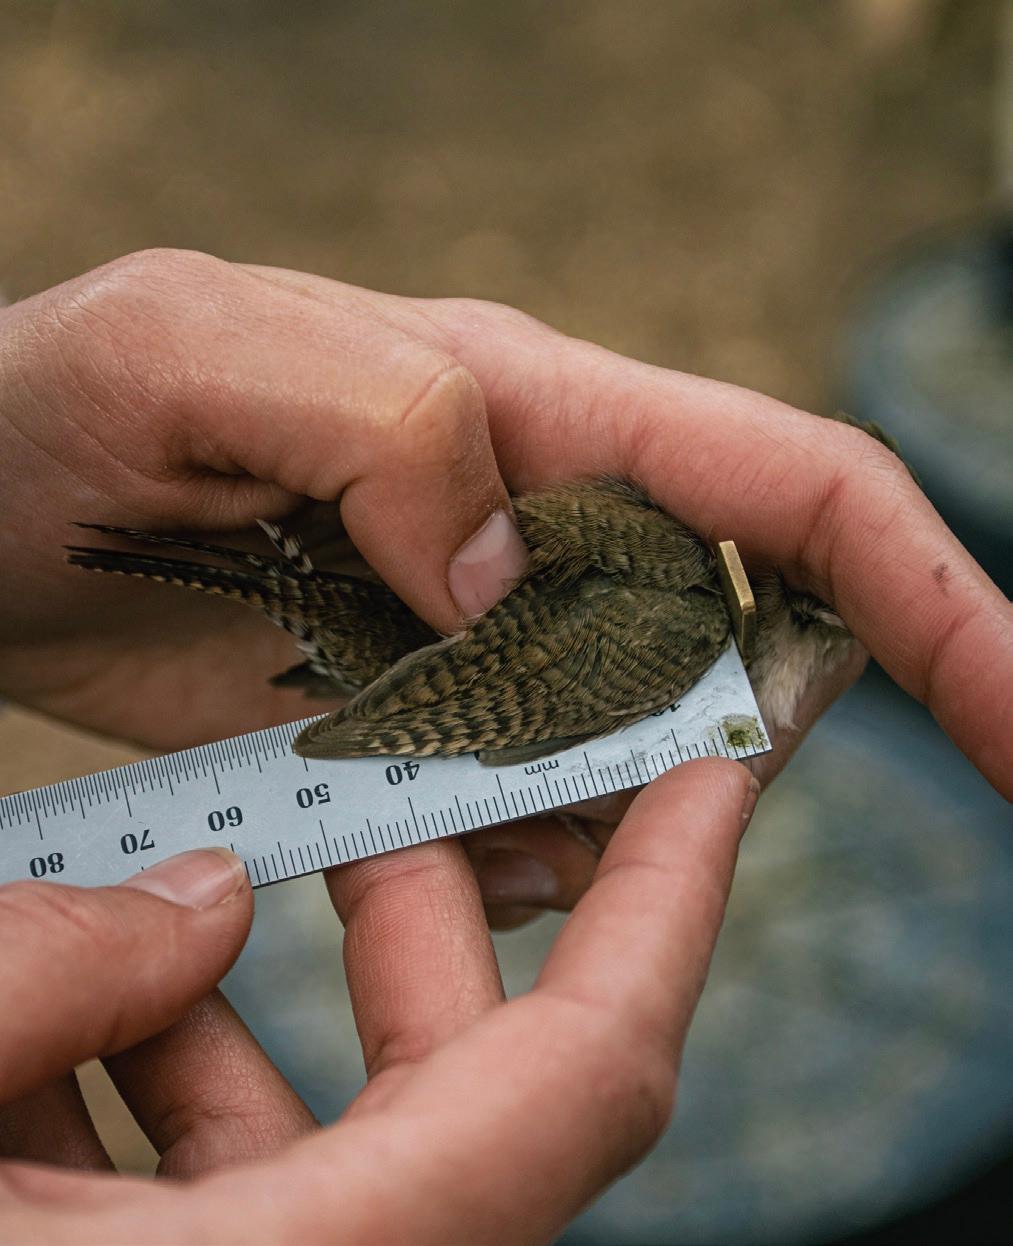 A birdwatcher measures and bands a bird for identification purposes. (Claudia Landreville)